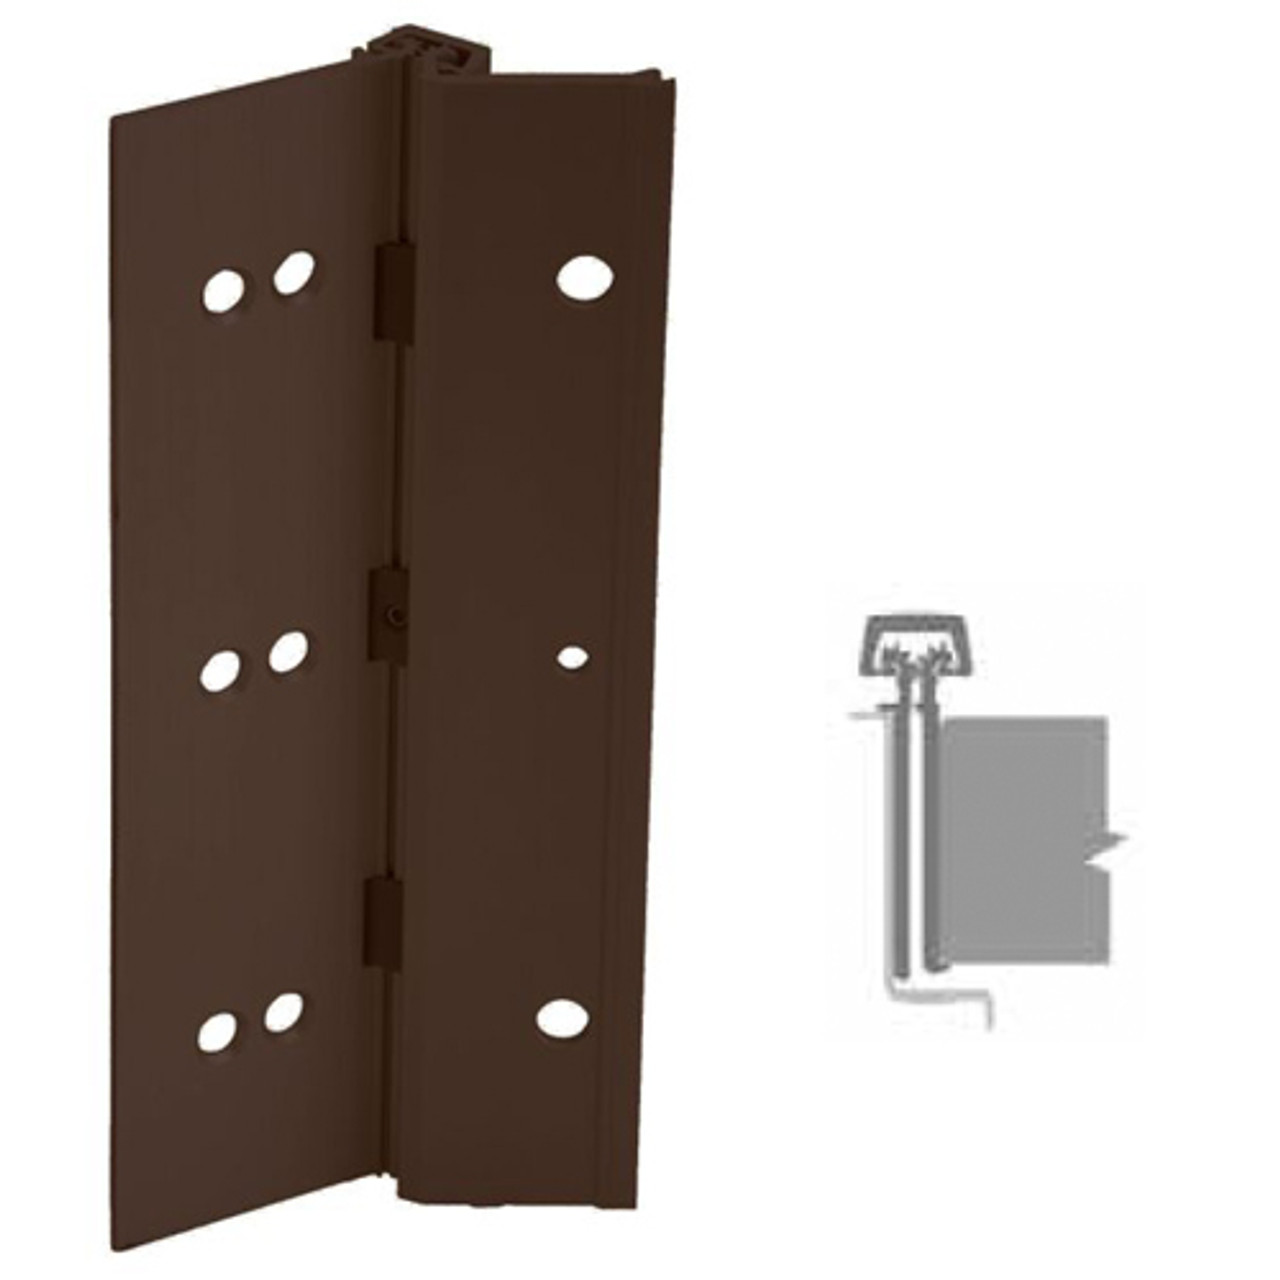 224HD-313AN-83-SECWDHM IVES Full Mortise Continuous Geared Hinges with Security Screws - Hex Pin Drive in Dark Bronze Anodized